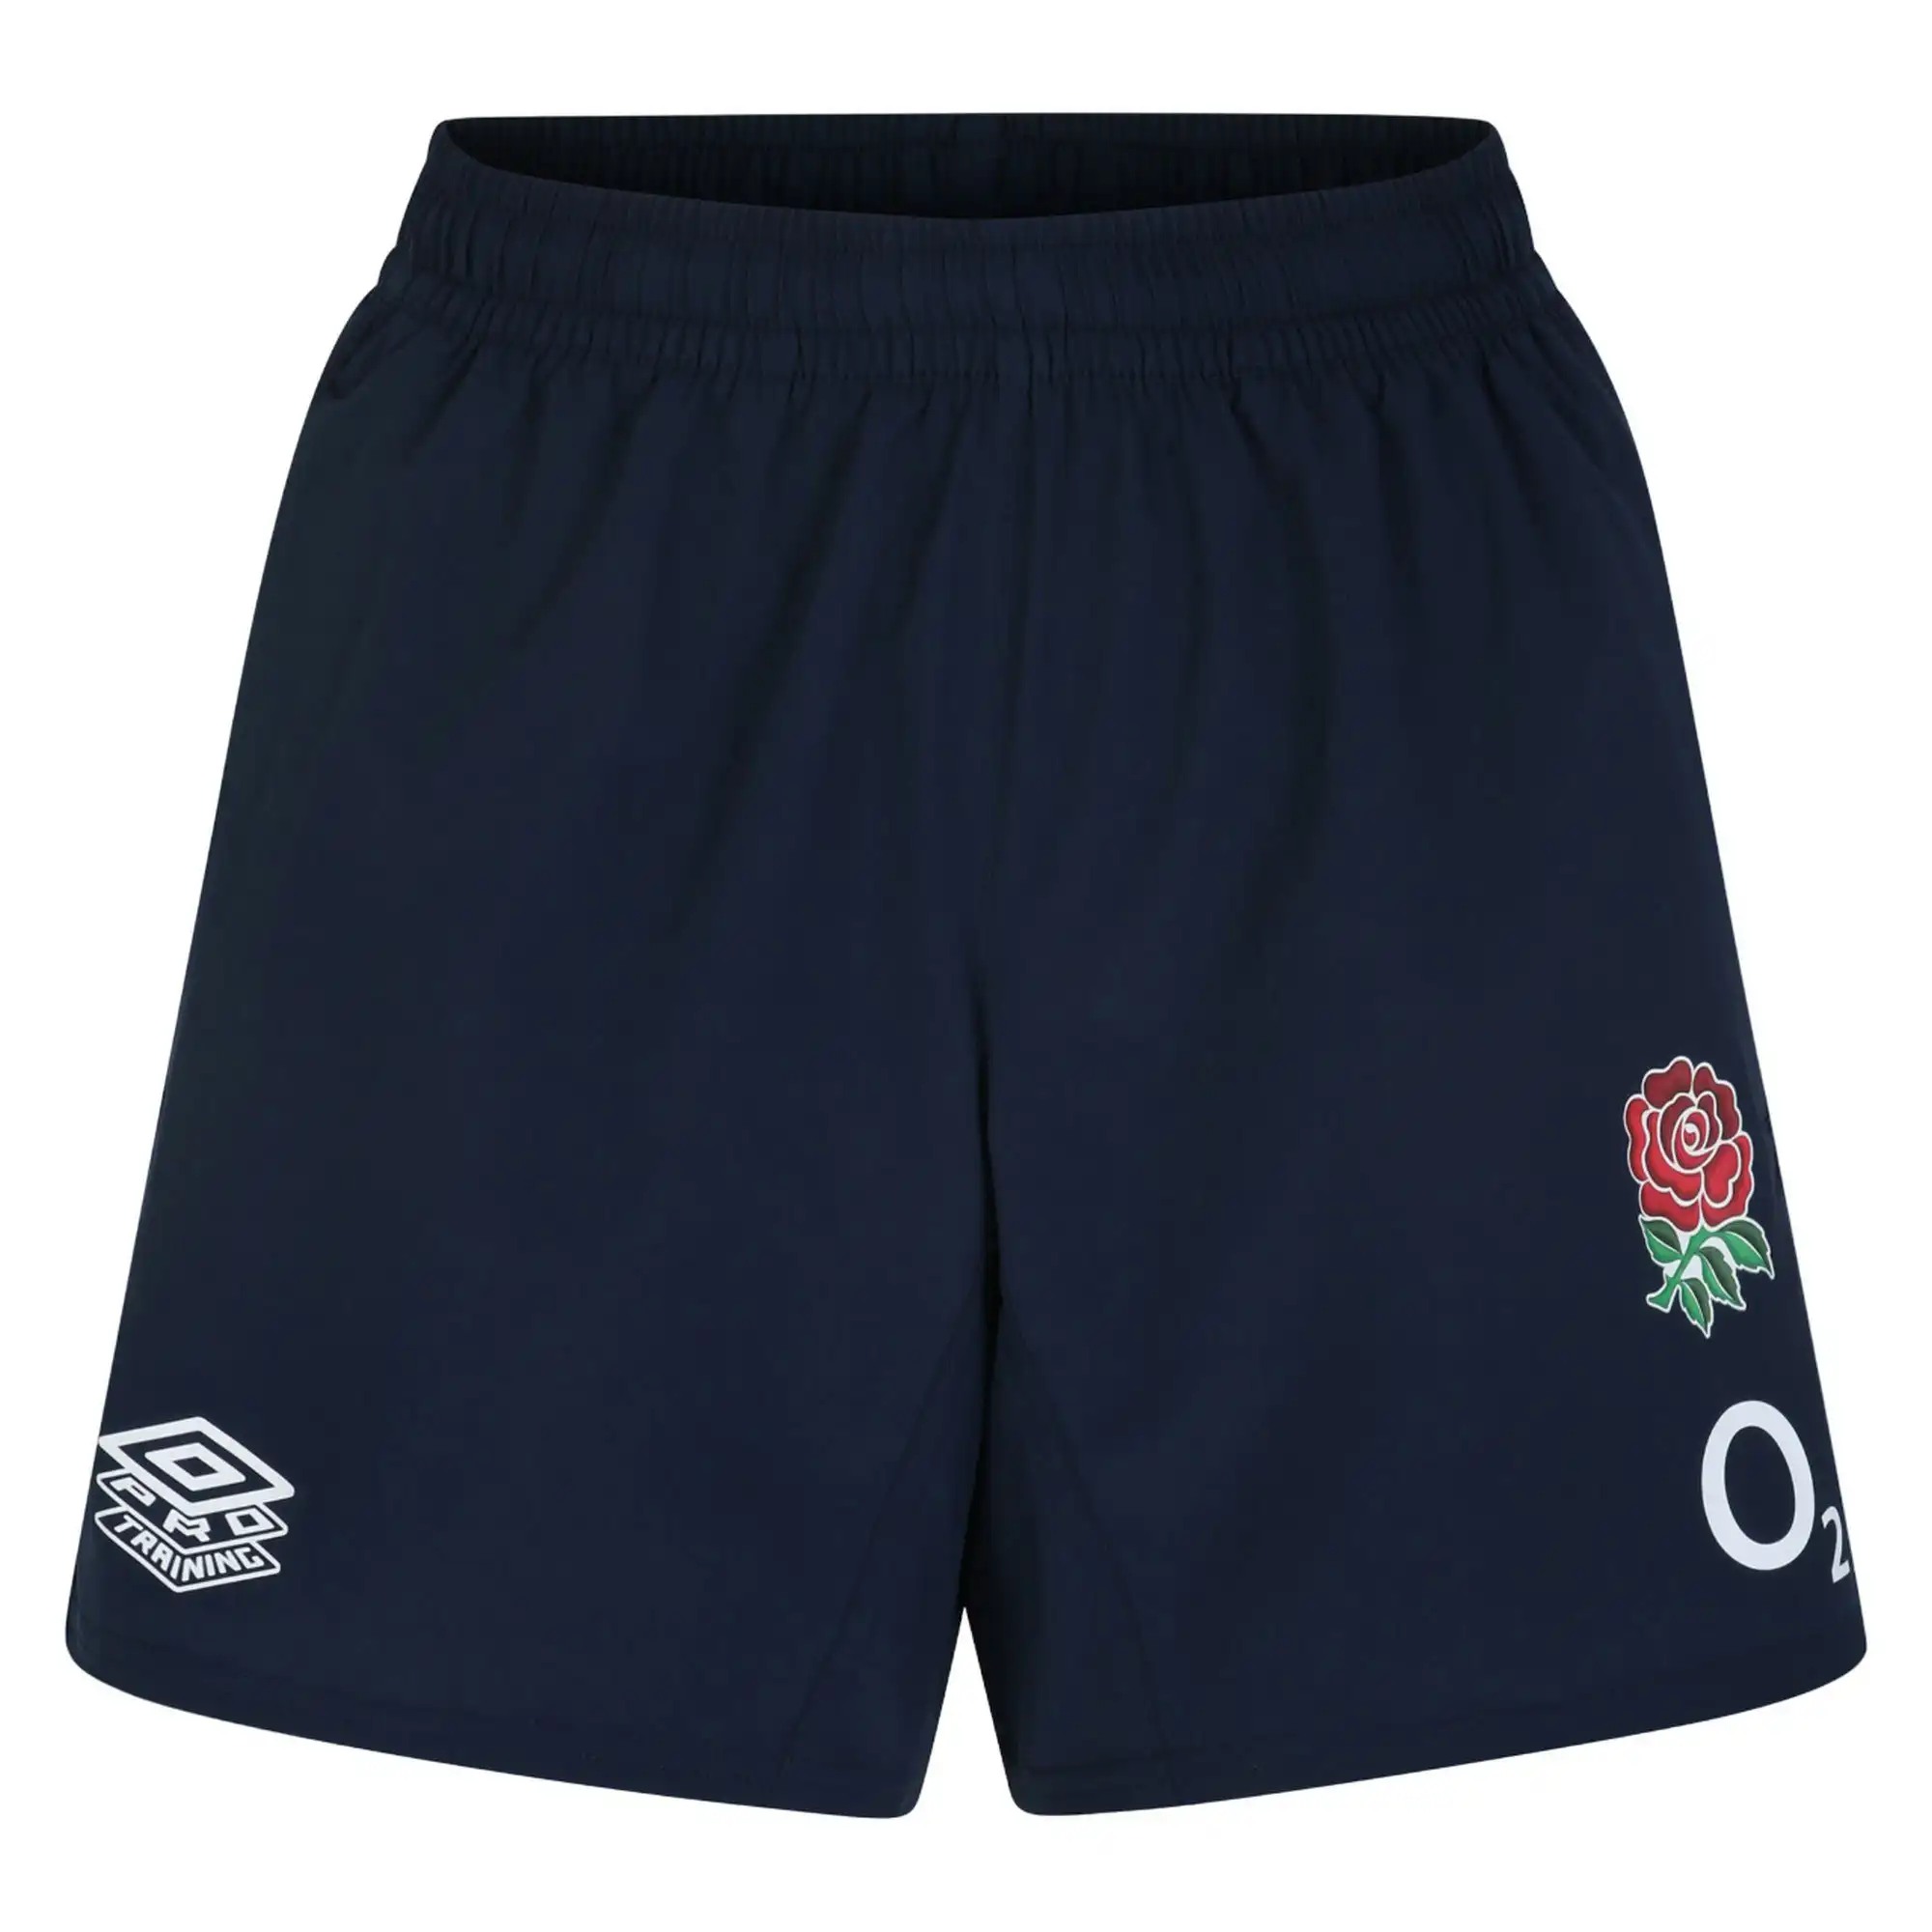 Umbro Womens/Ladies 23/24 England Rugby Gym Shorts